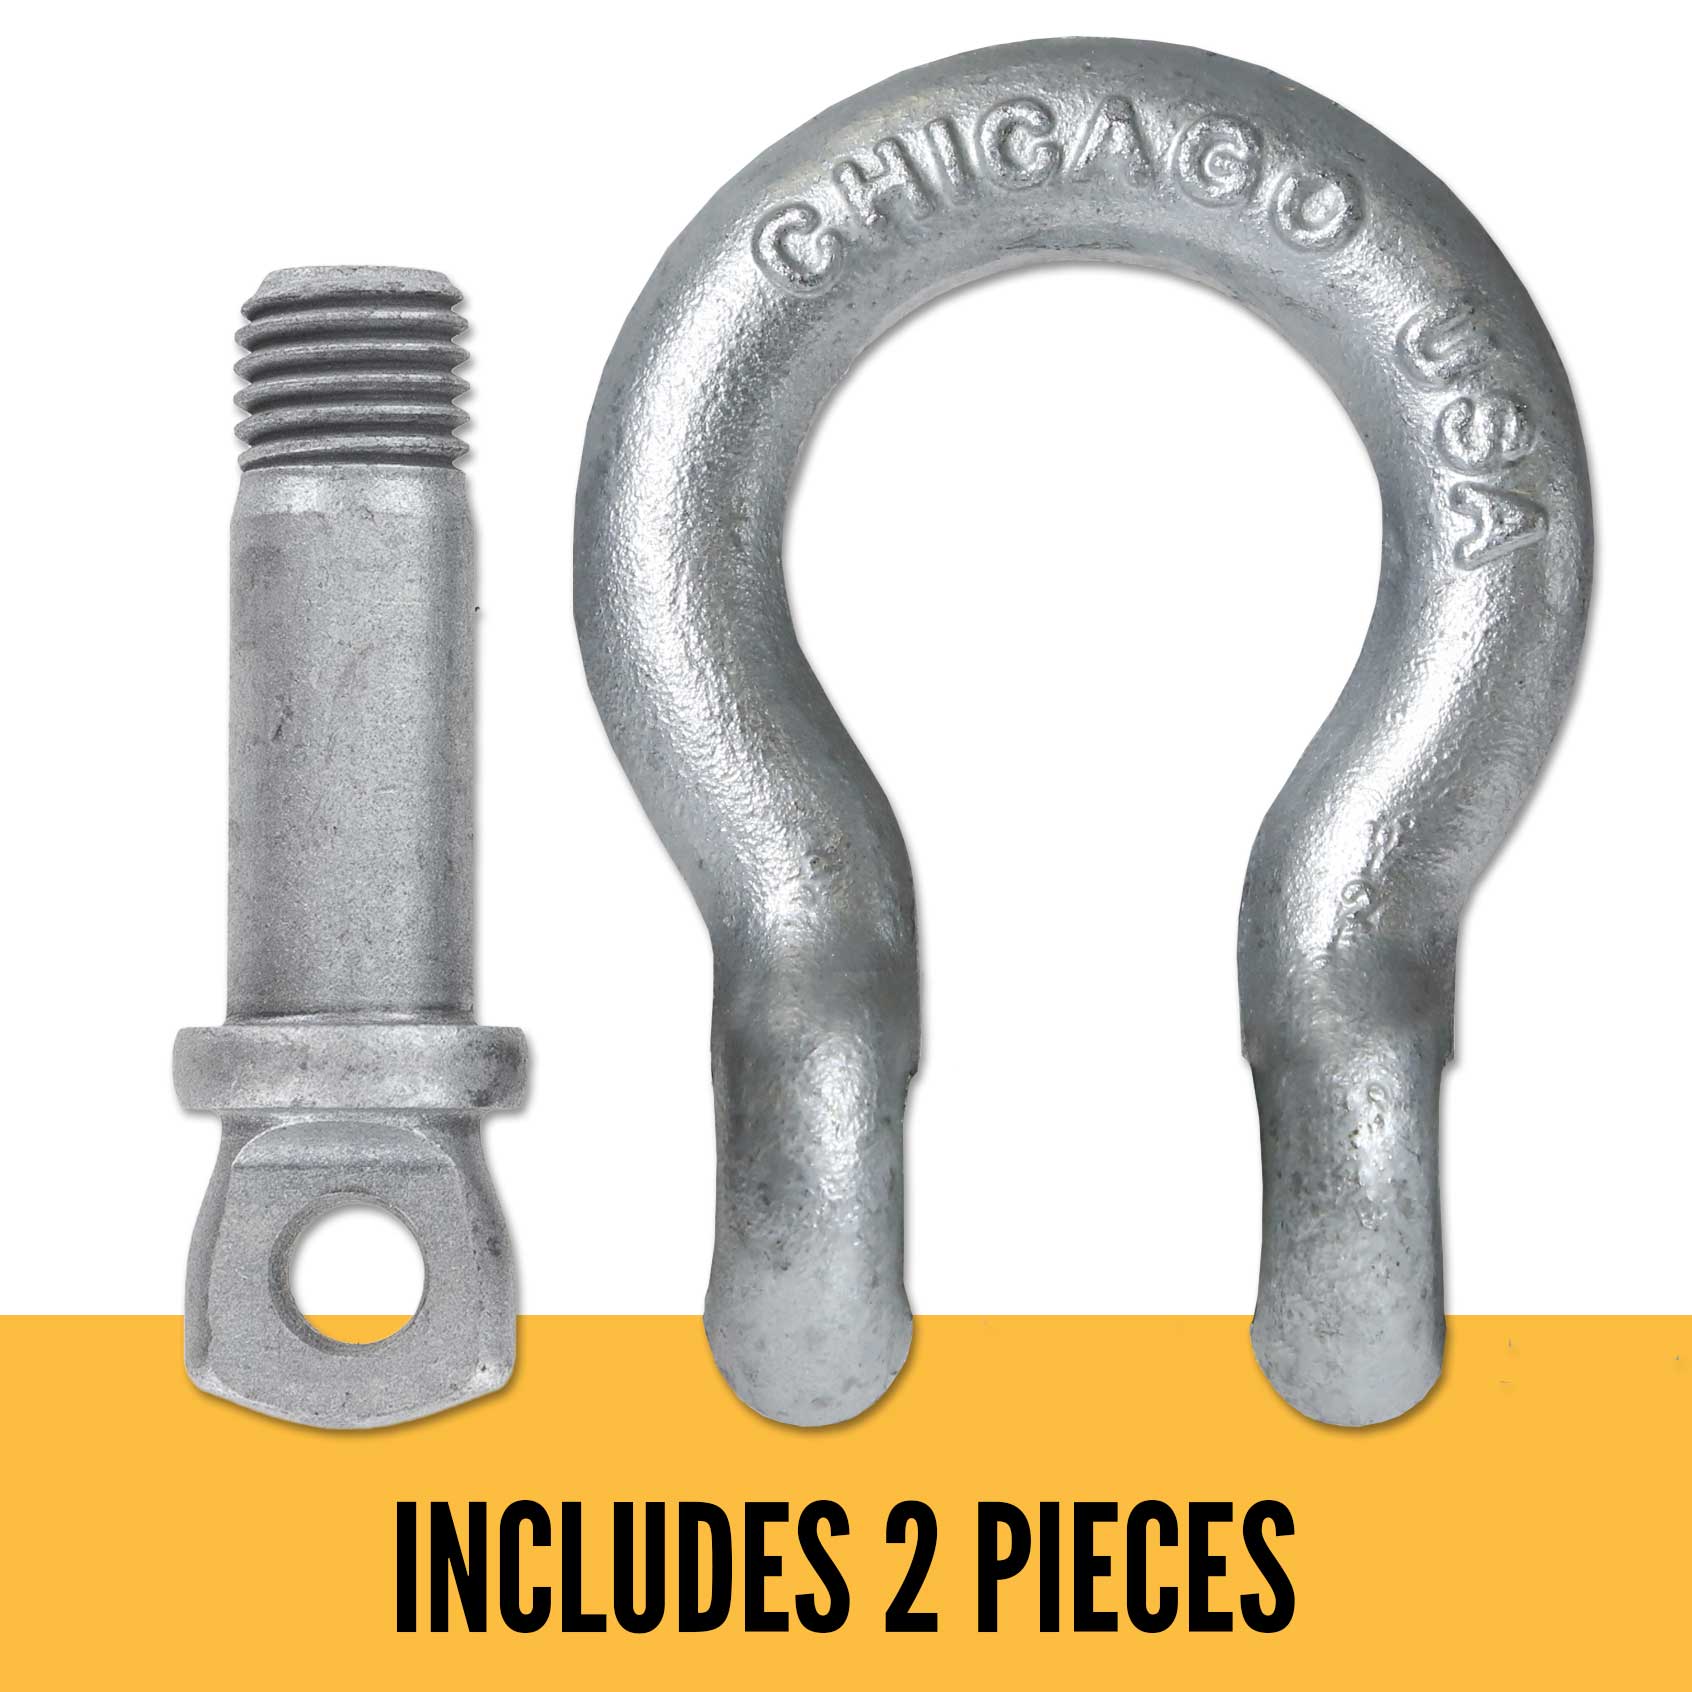 Screw Pin Anchor Shackle - Chicago Hardware - 7/16" Galvanized Steel - 1.5 Ton parts of a shackle